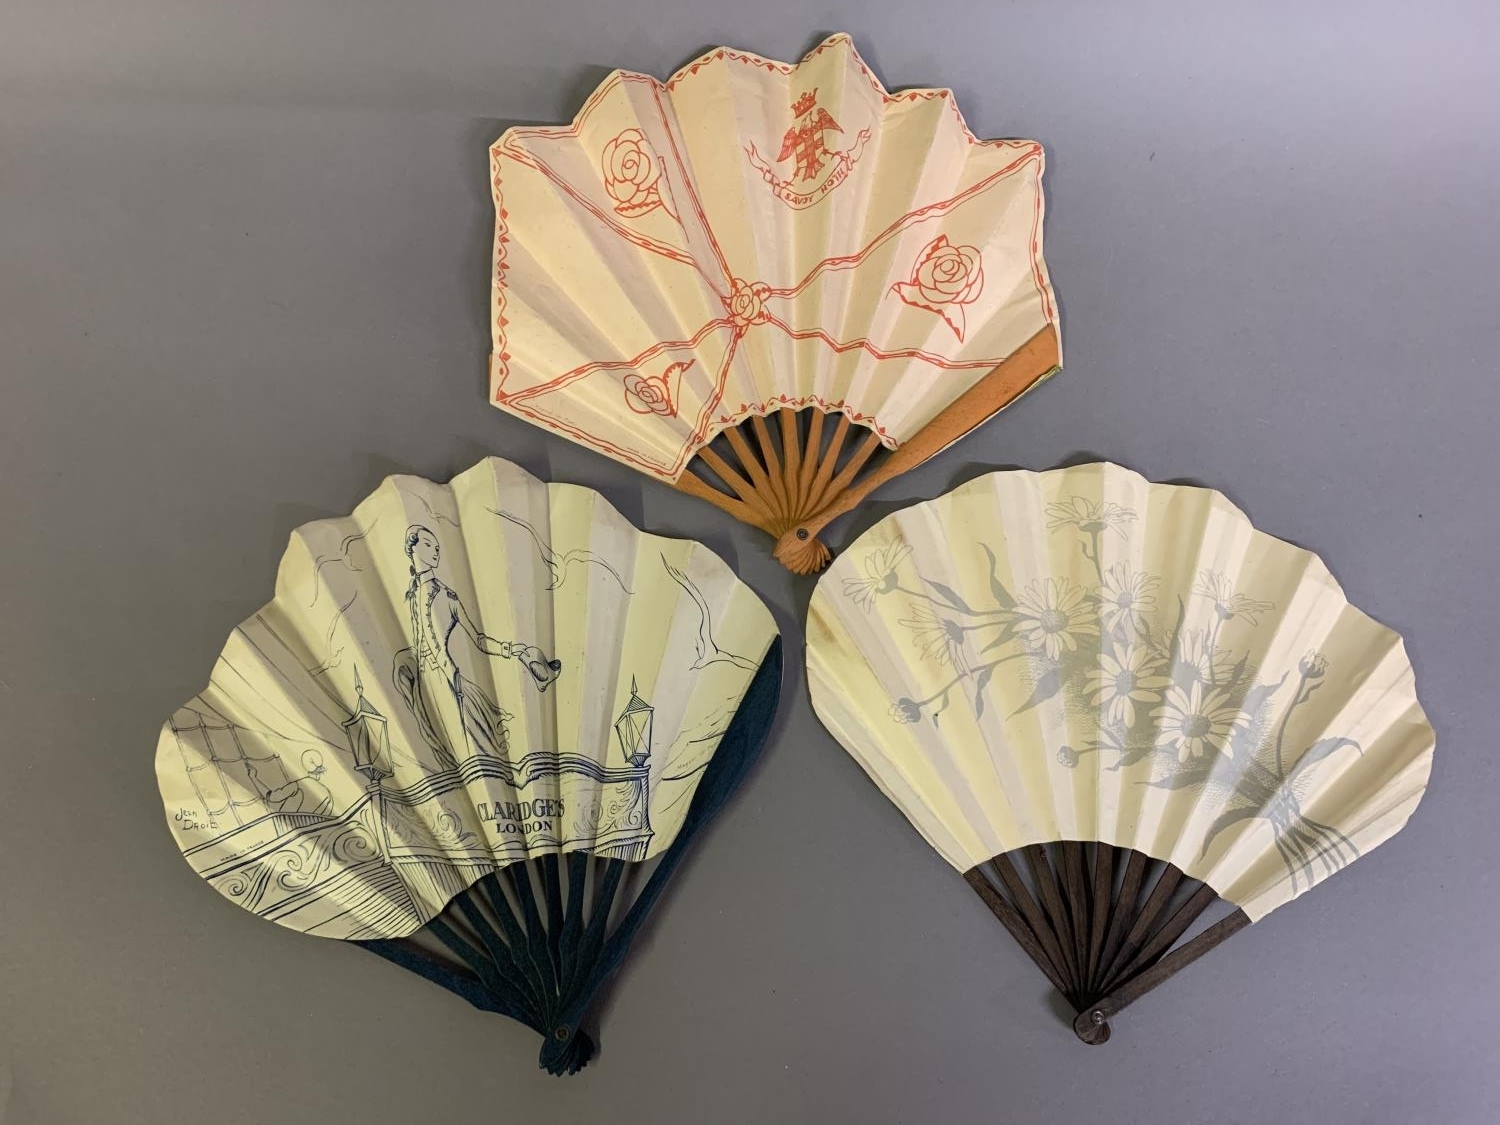 A very Deco ballon fan, unusually with straight sides, showing an elegant lady choosing her - Image 2 of 2